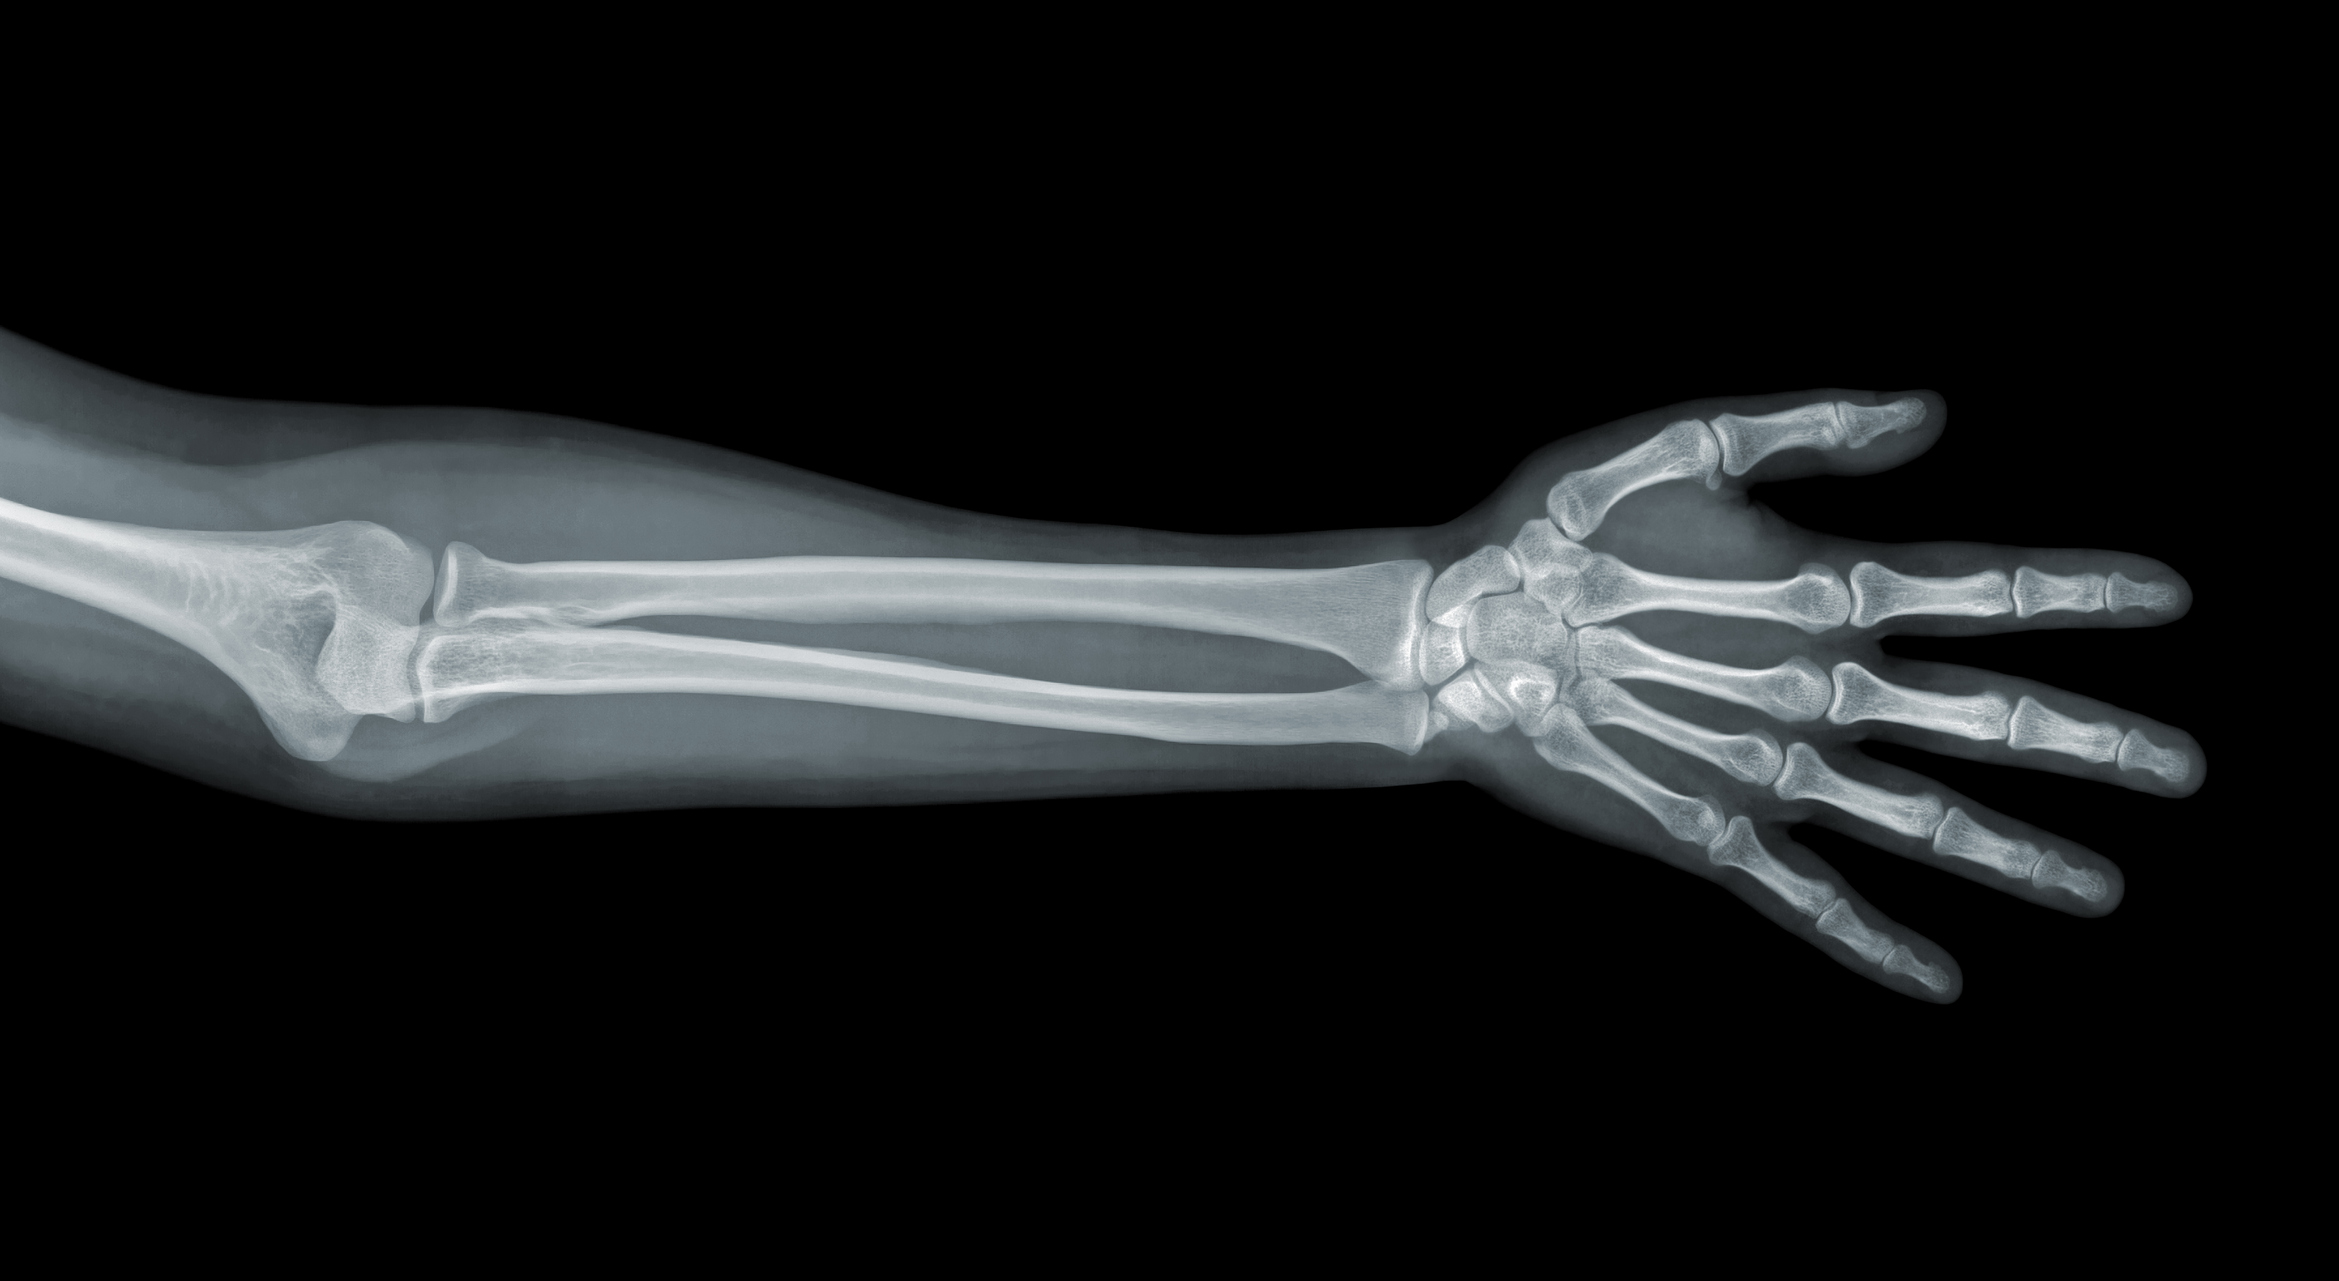 x-ray showing the bones of the arm and hand